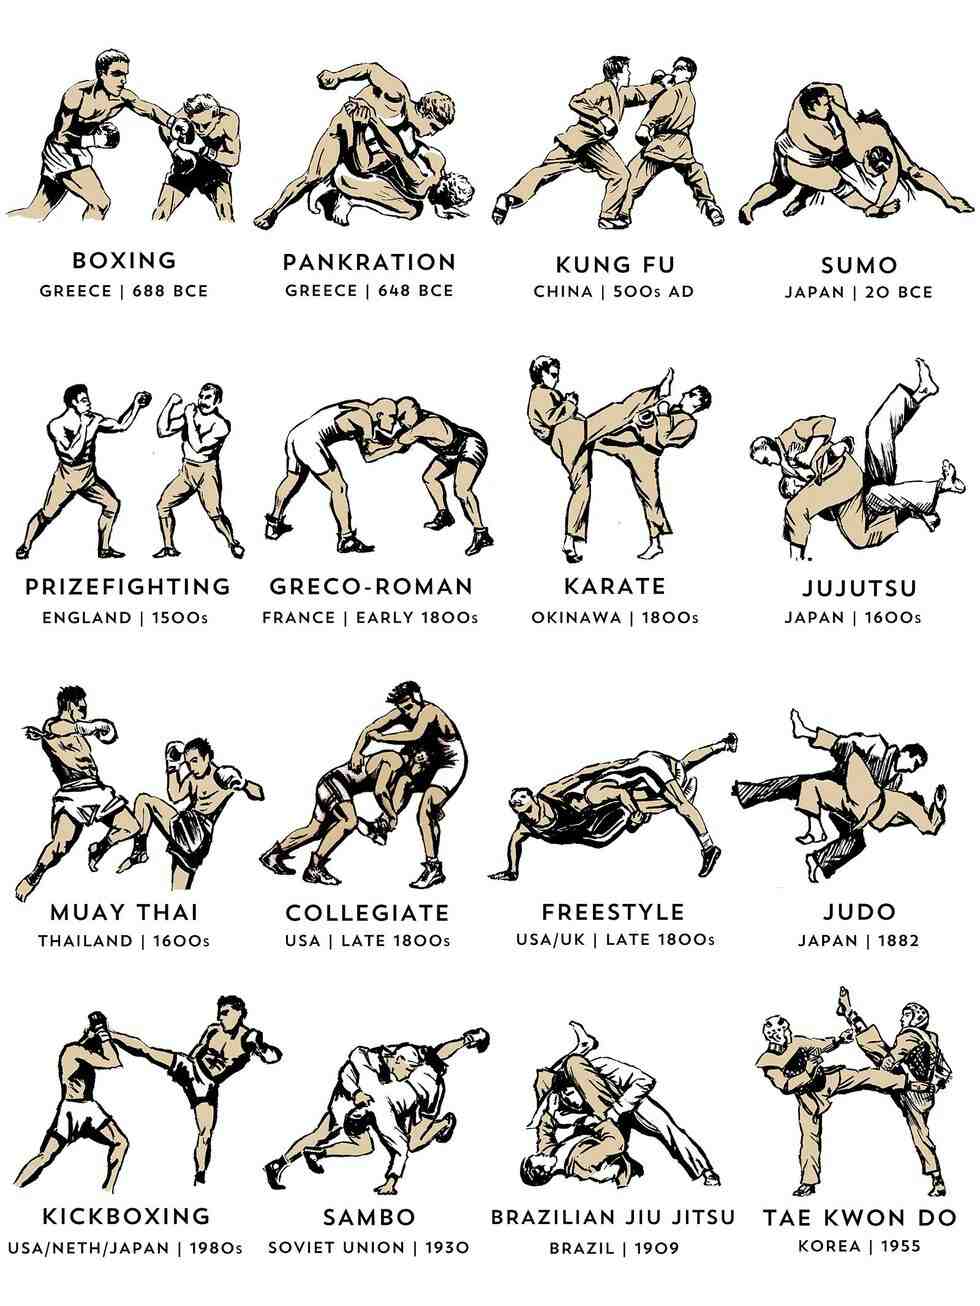 What type of fighting is best to learn?